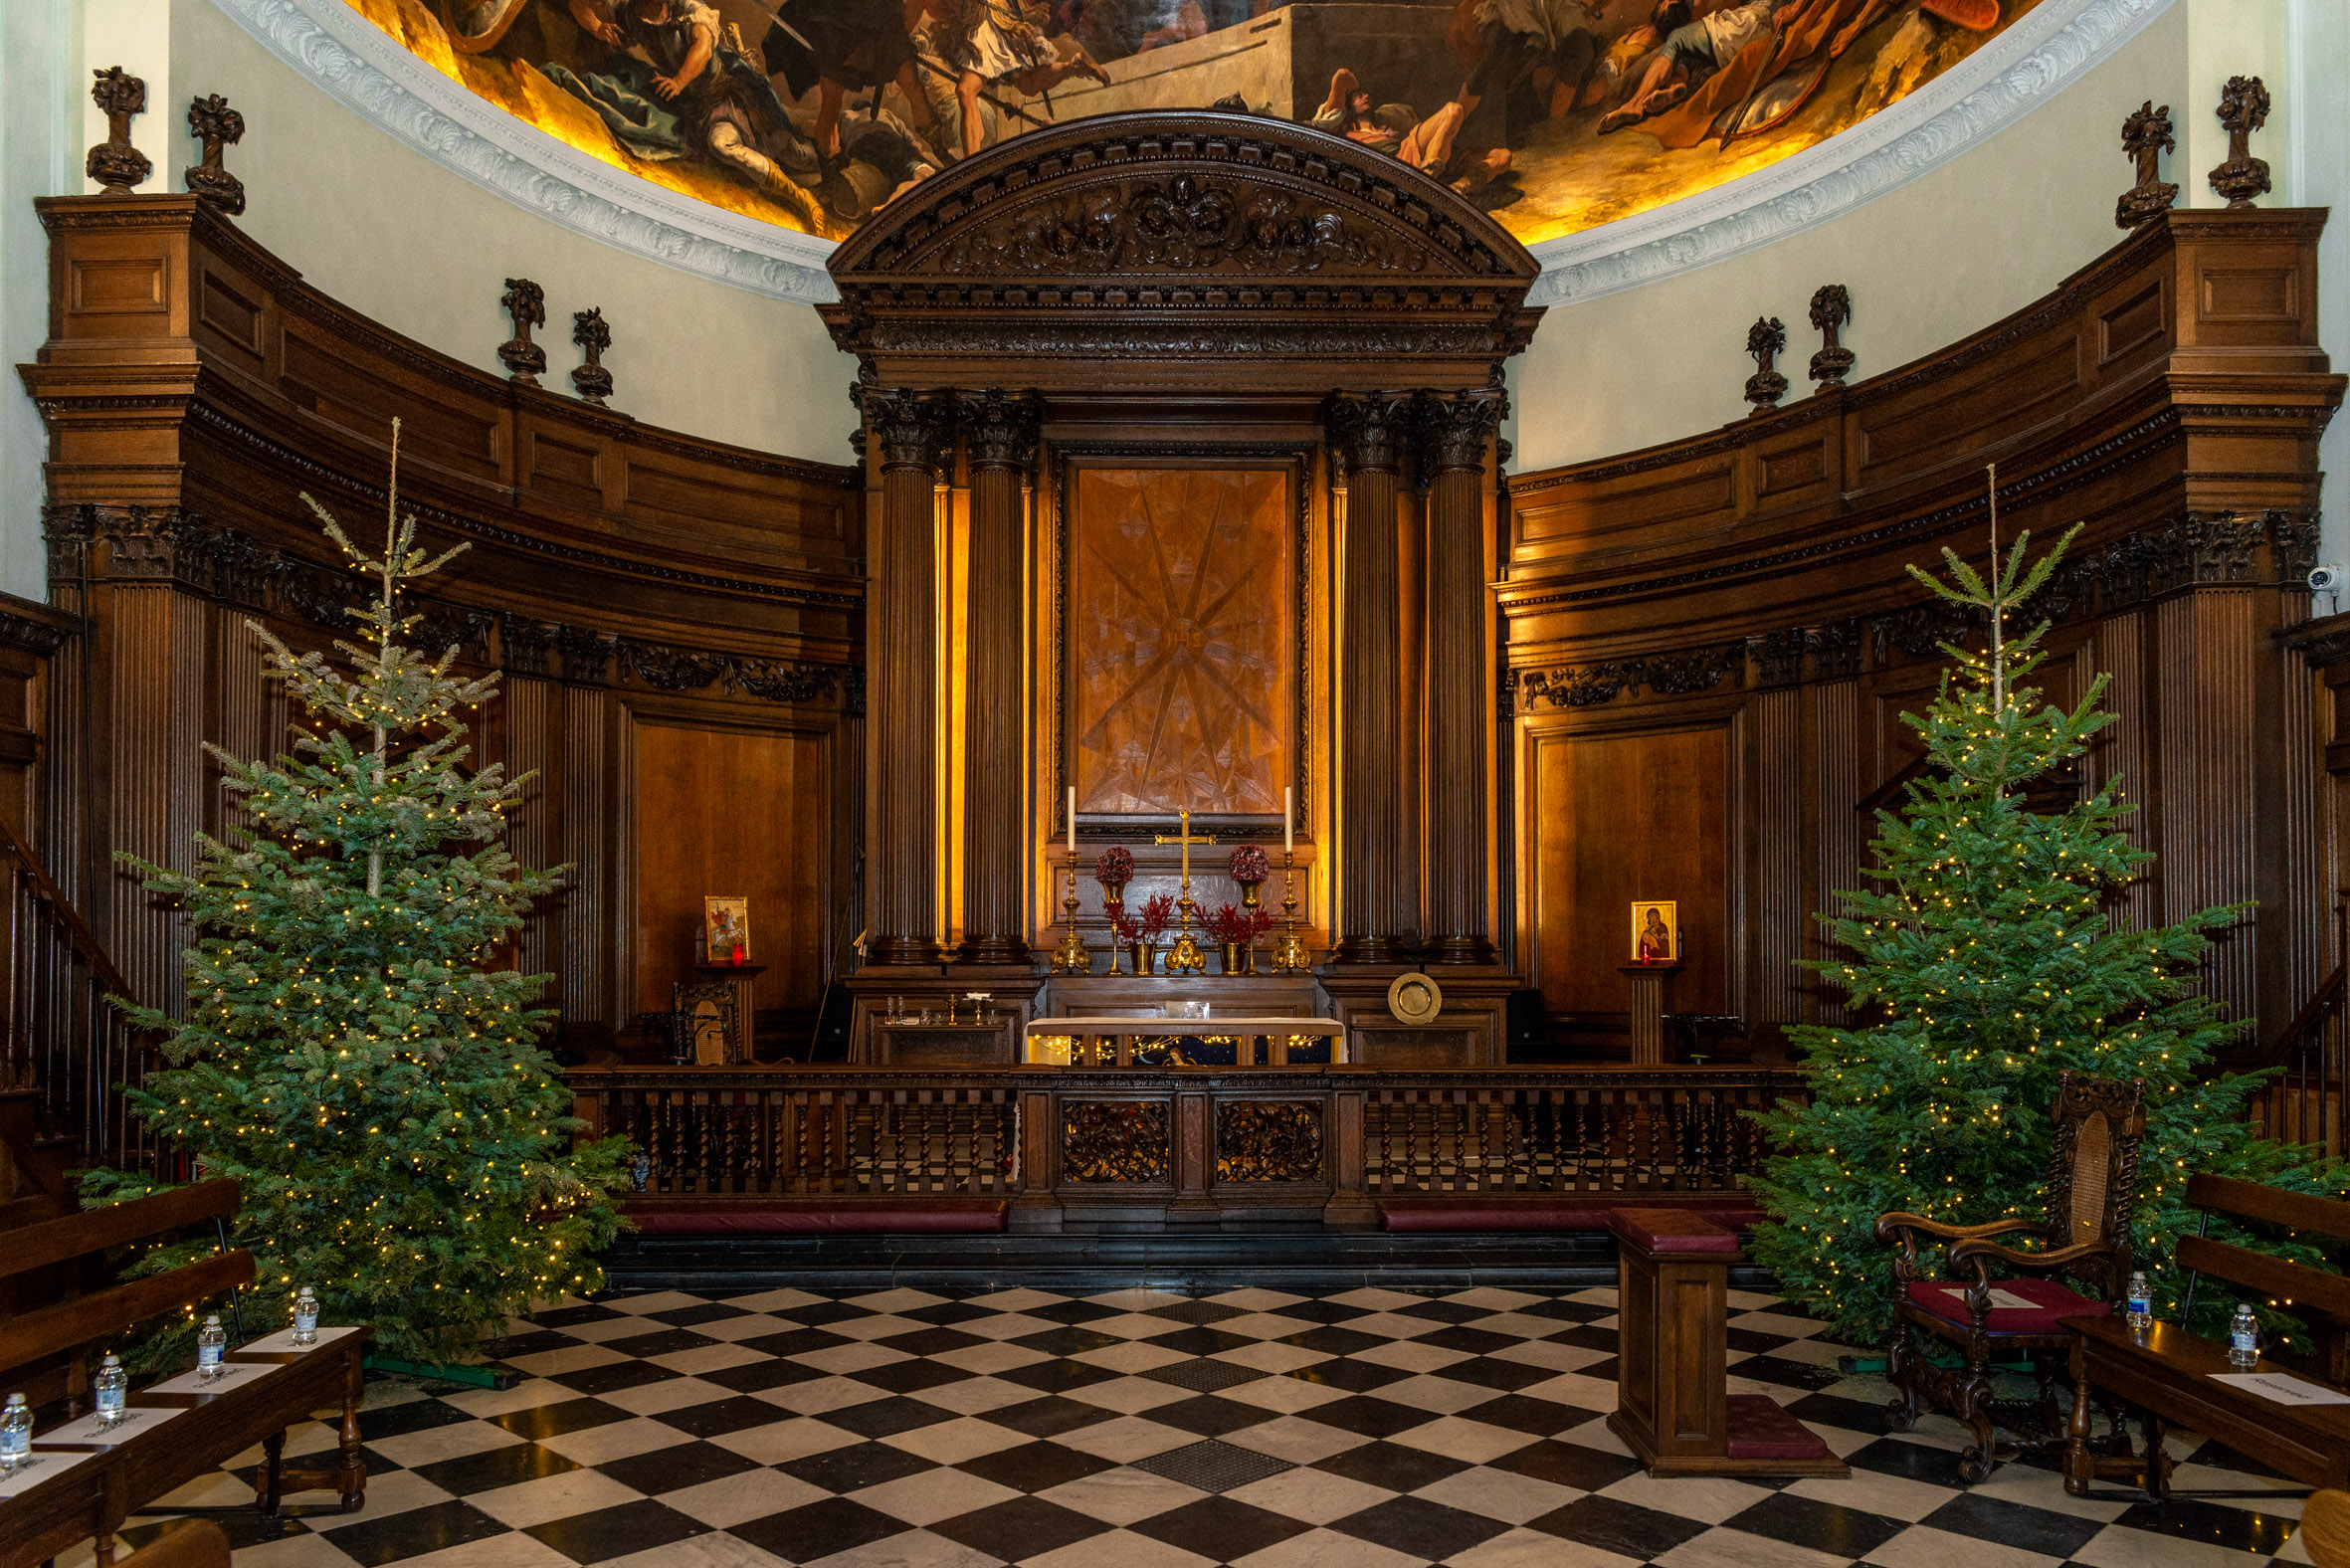 The Wren Chapel at the Royal Hospital Chelsea during Carols from Chelsea